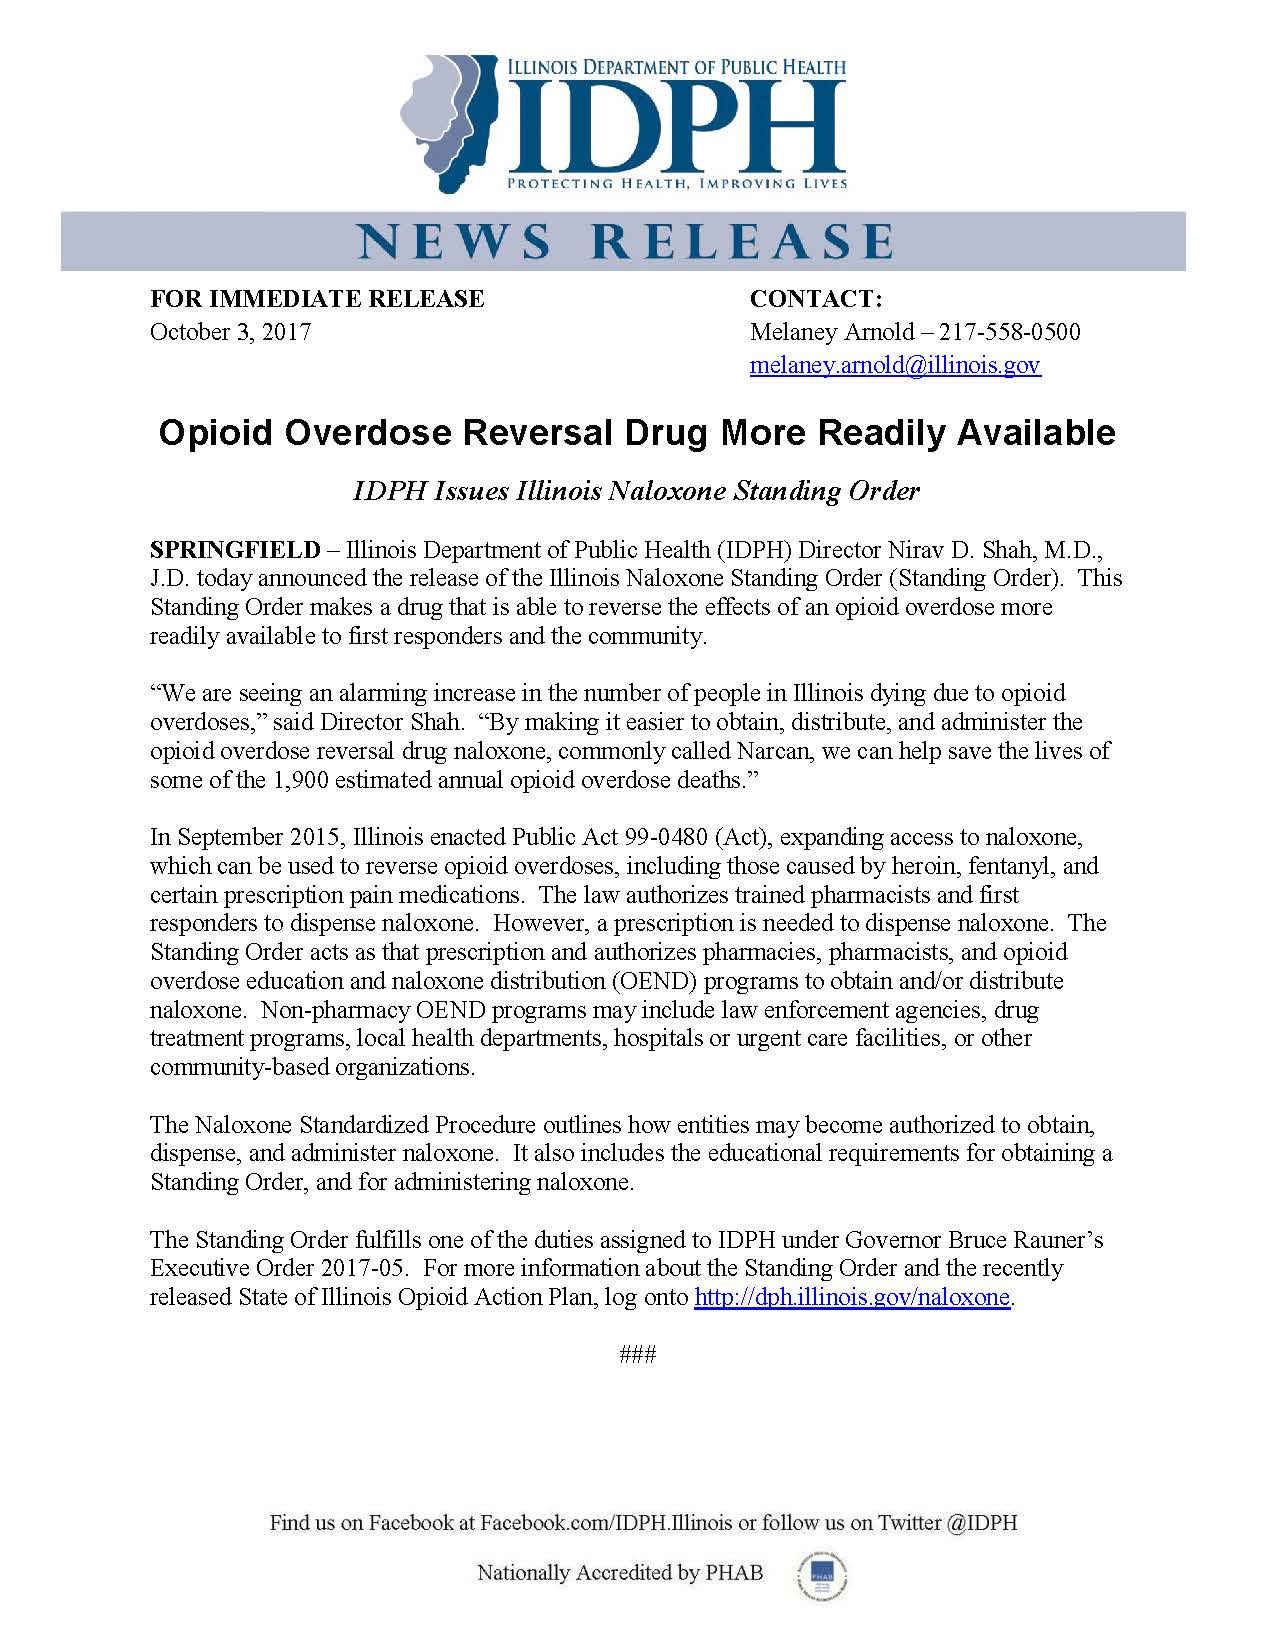 Opioid Overdose Reversal Drug More Readily Available